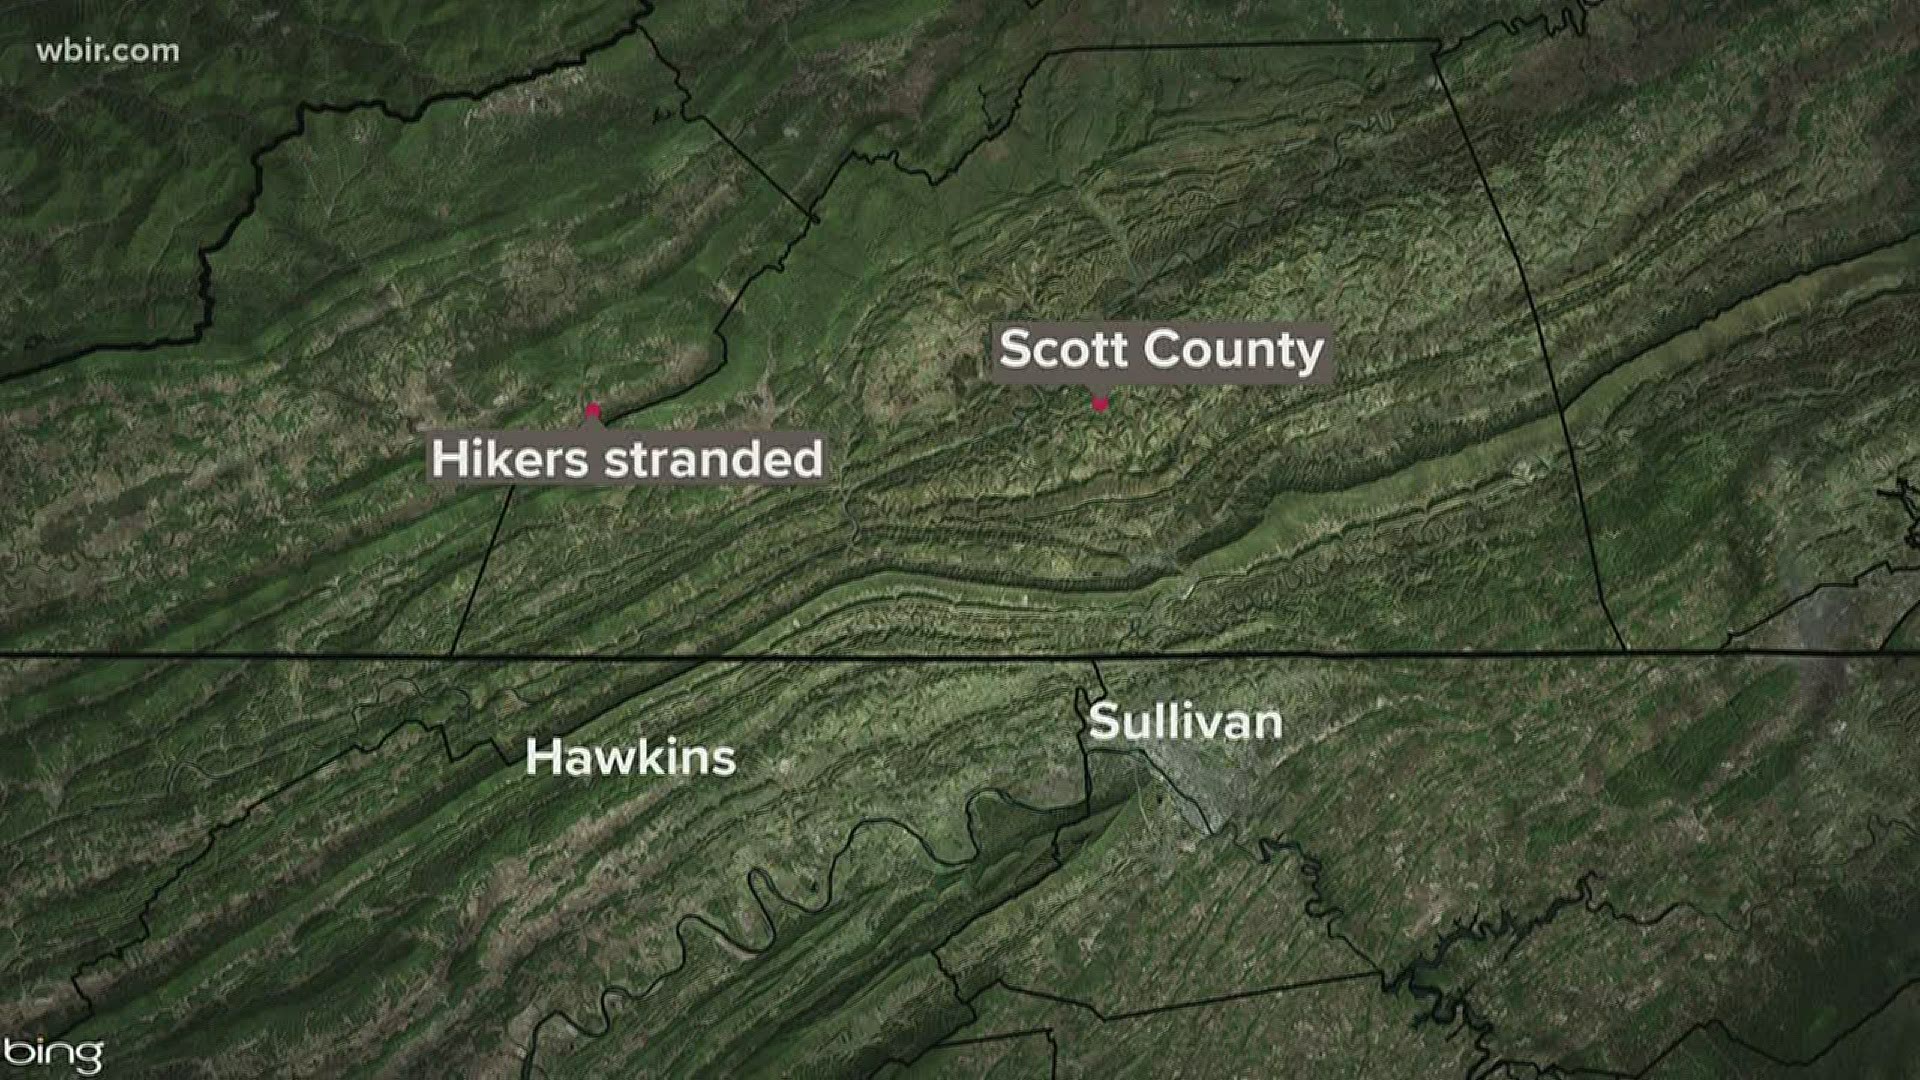 Crews are working to rescue over 25 people who were stranded near a southwest Virginia swimming hole.